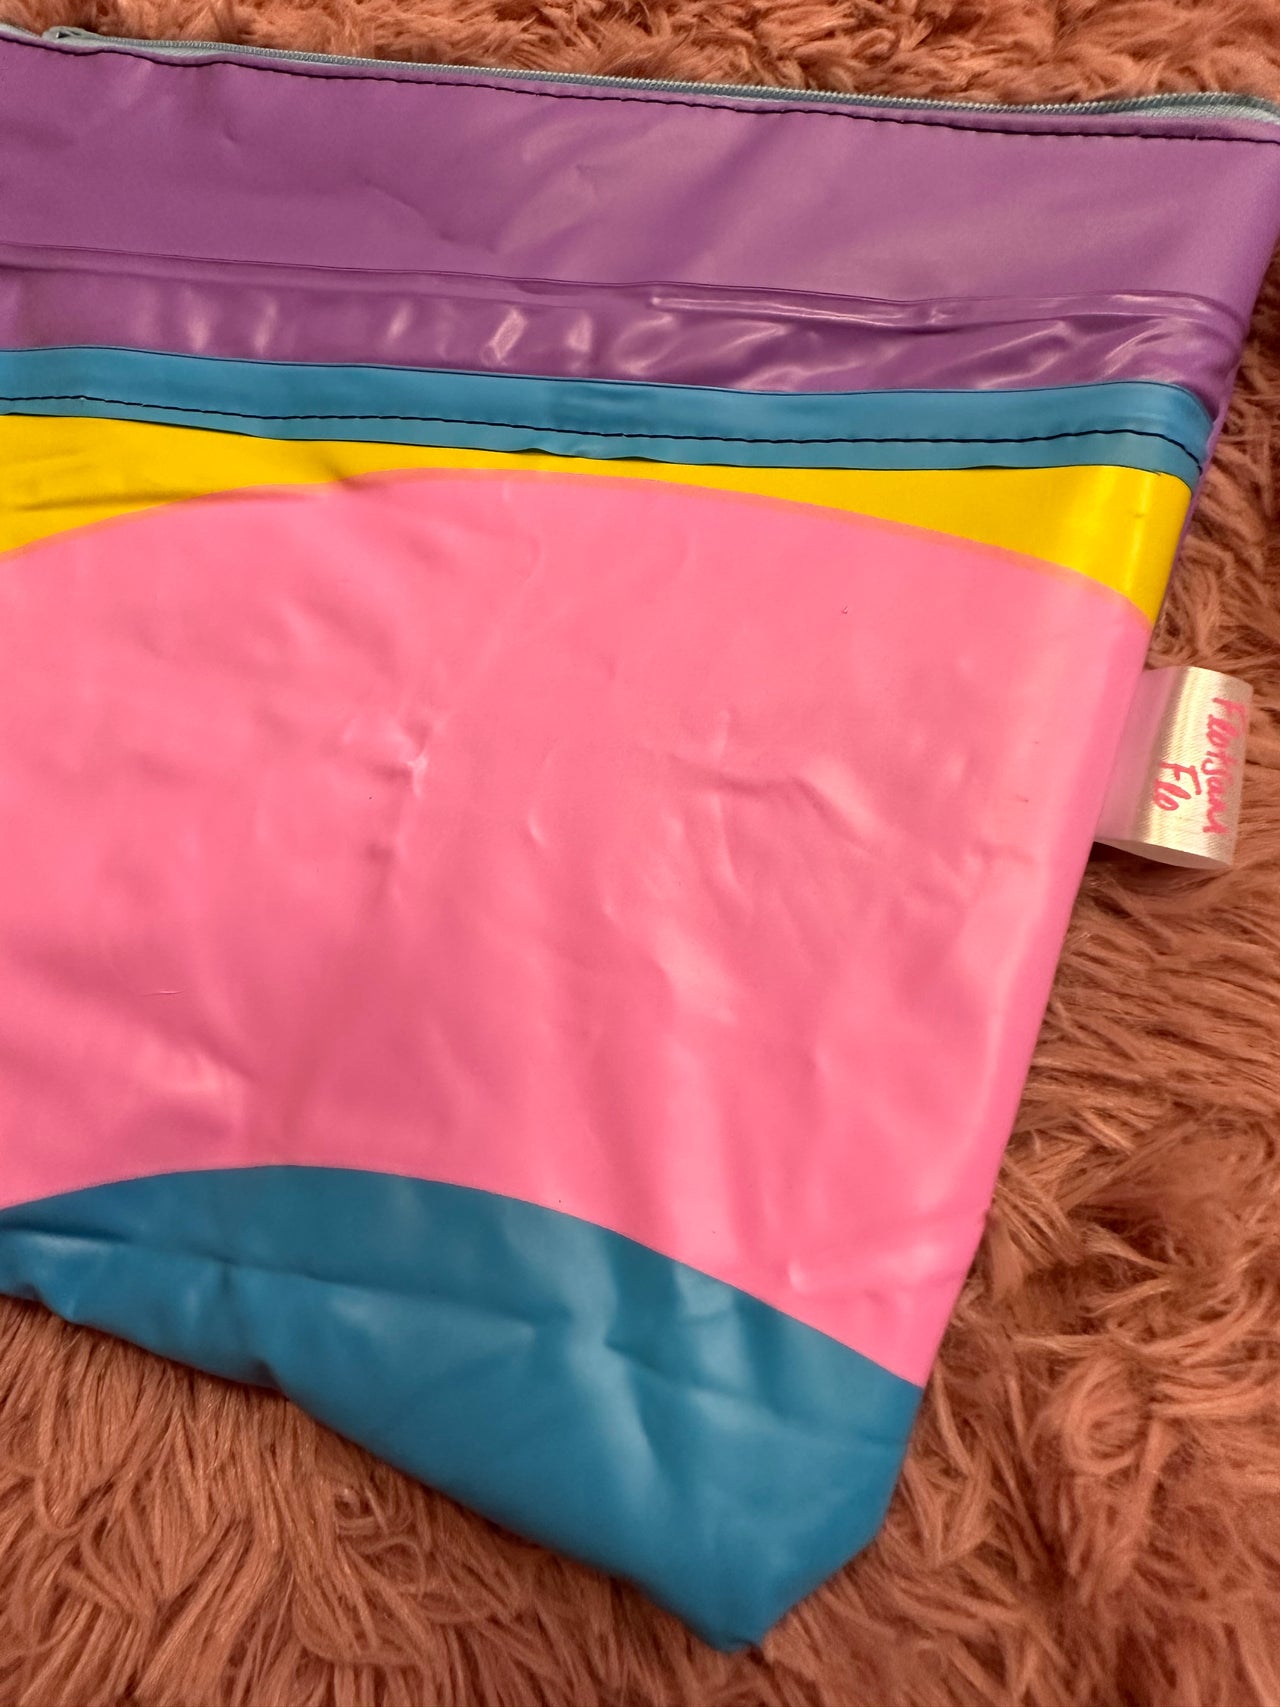 I used to be a broken inflatable and a Banner - Larger Rainbow pouch